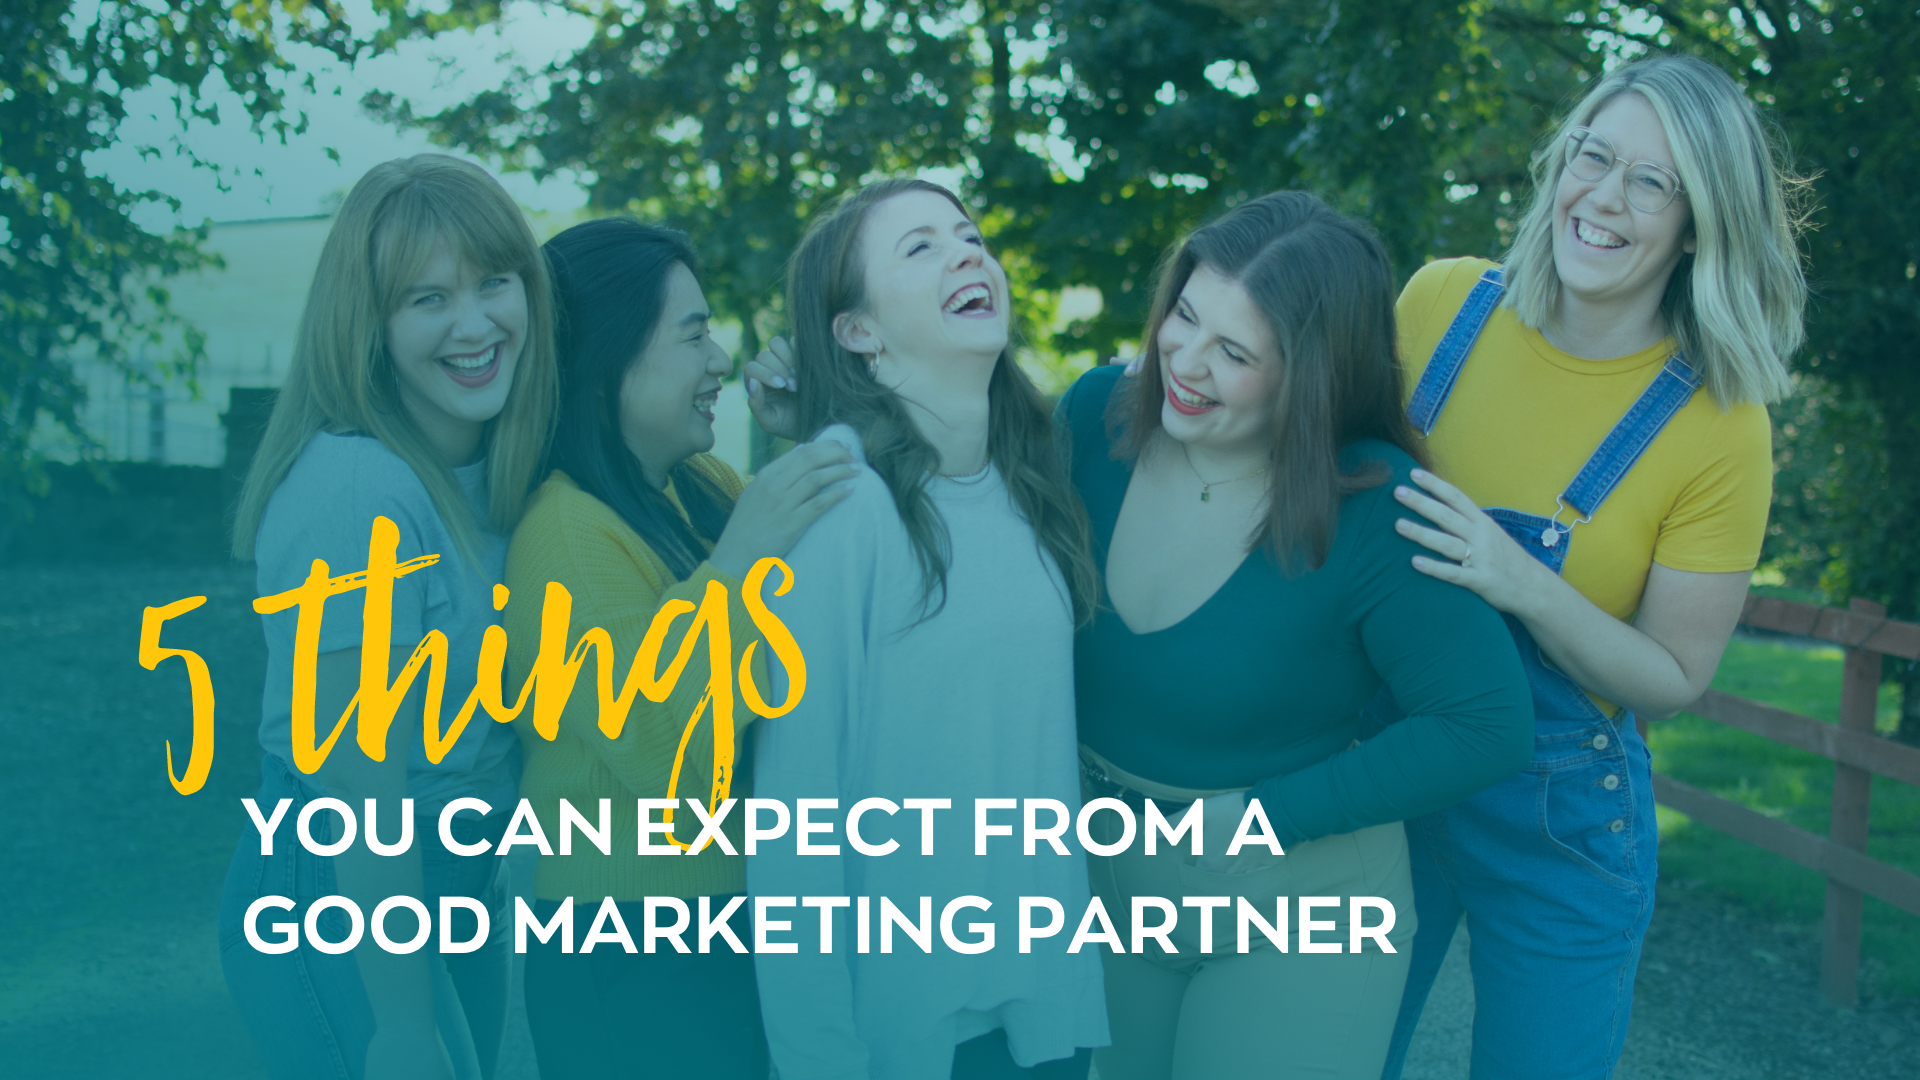 5 things you can expect from a good marketing partner